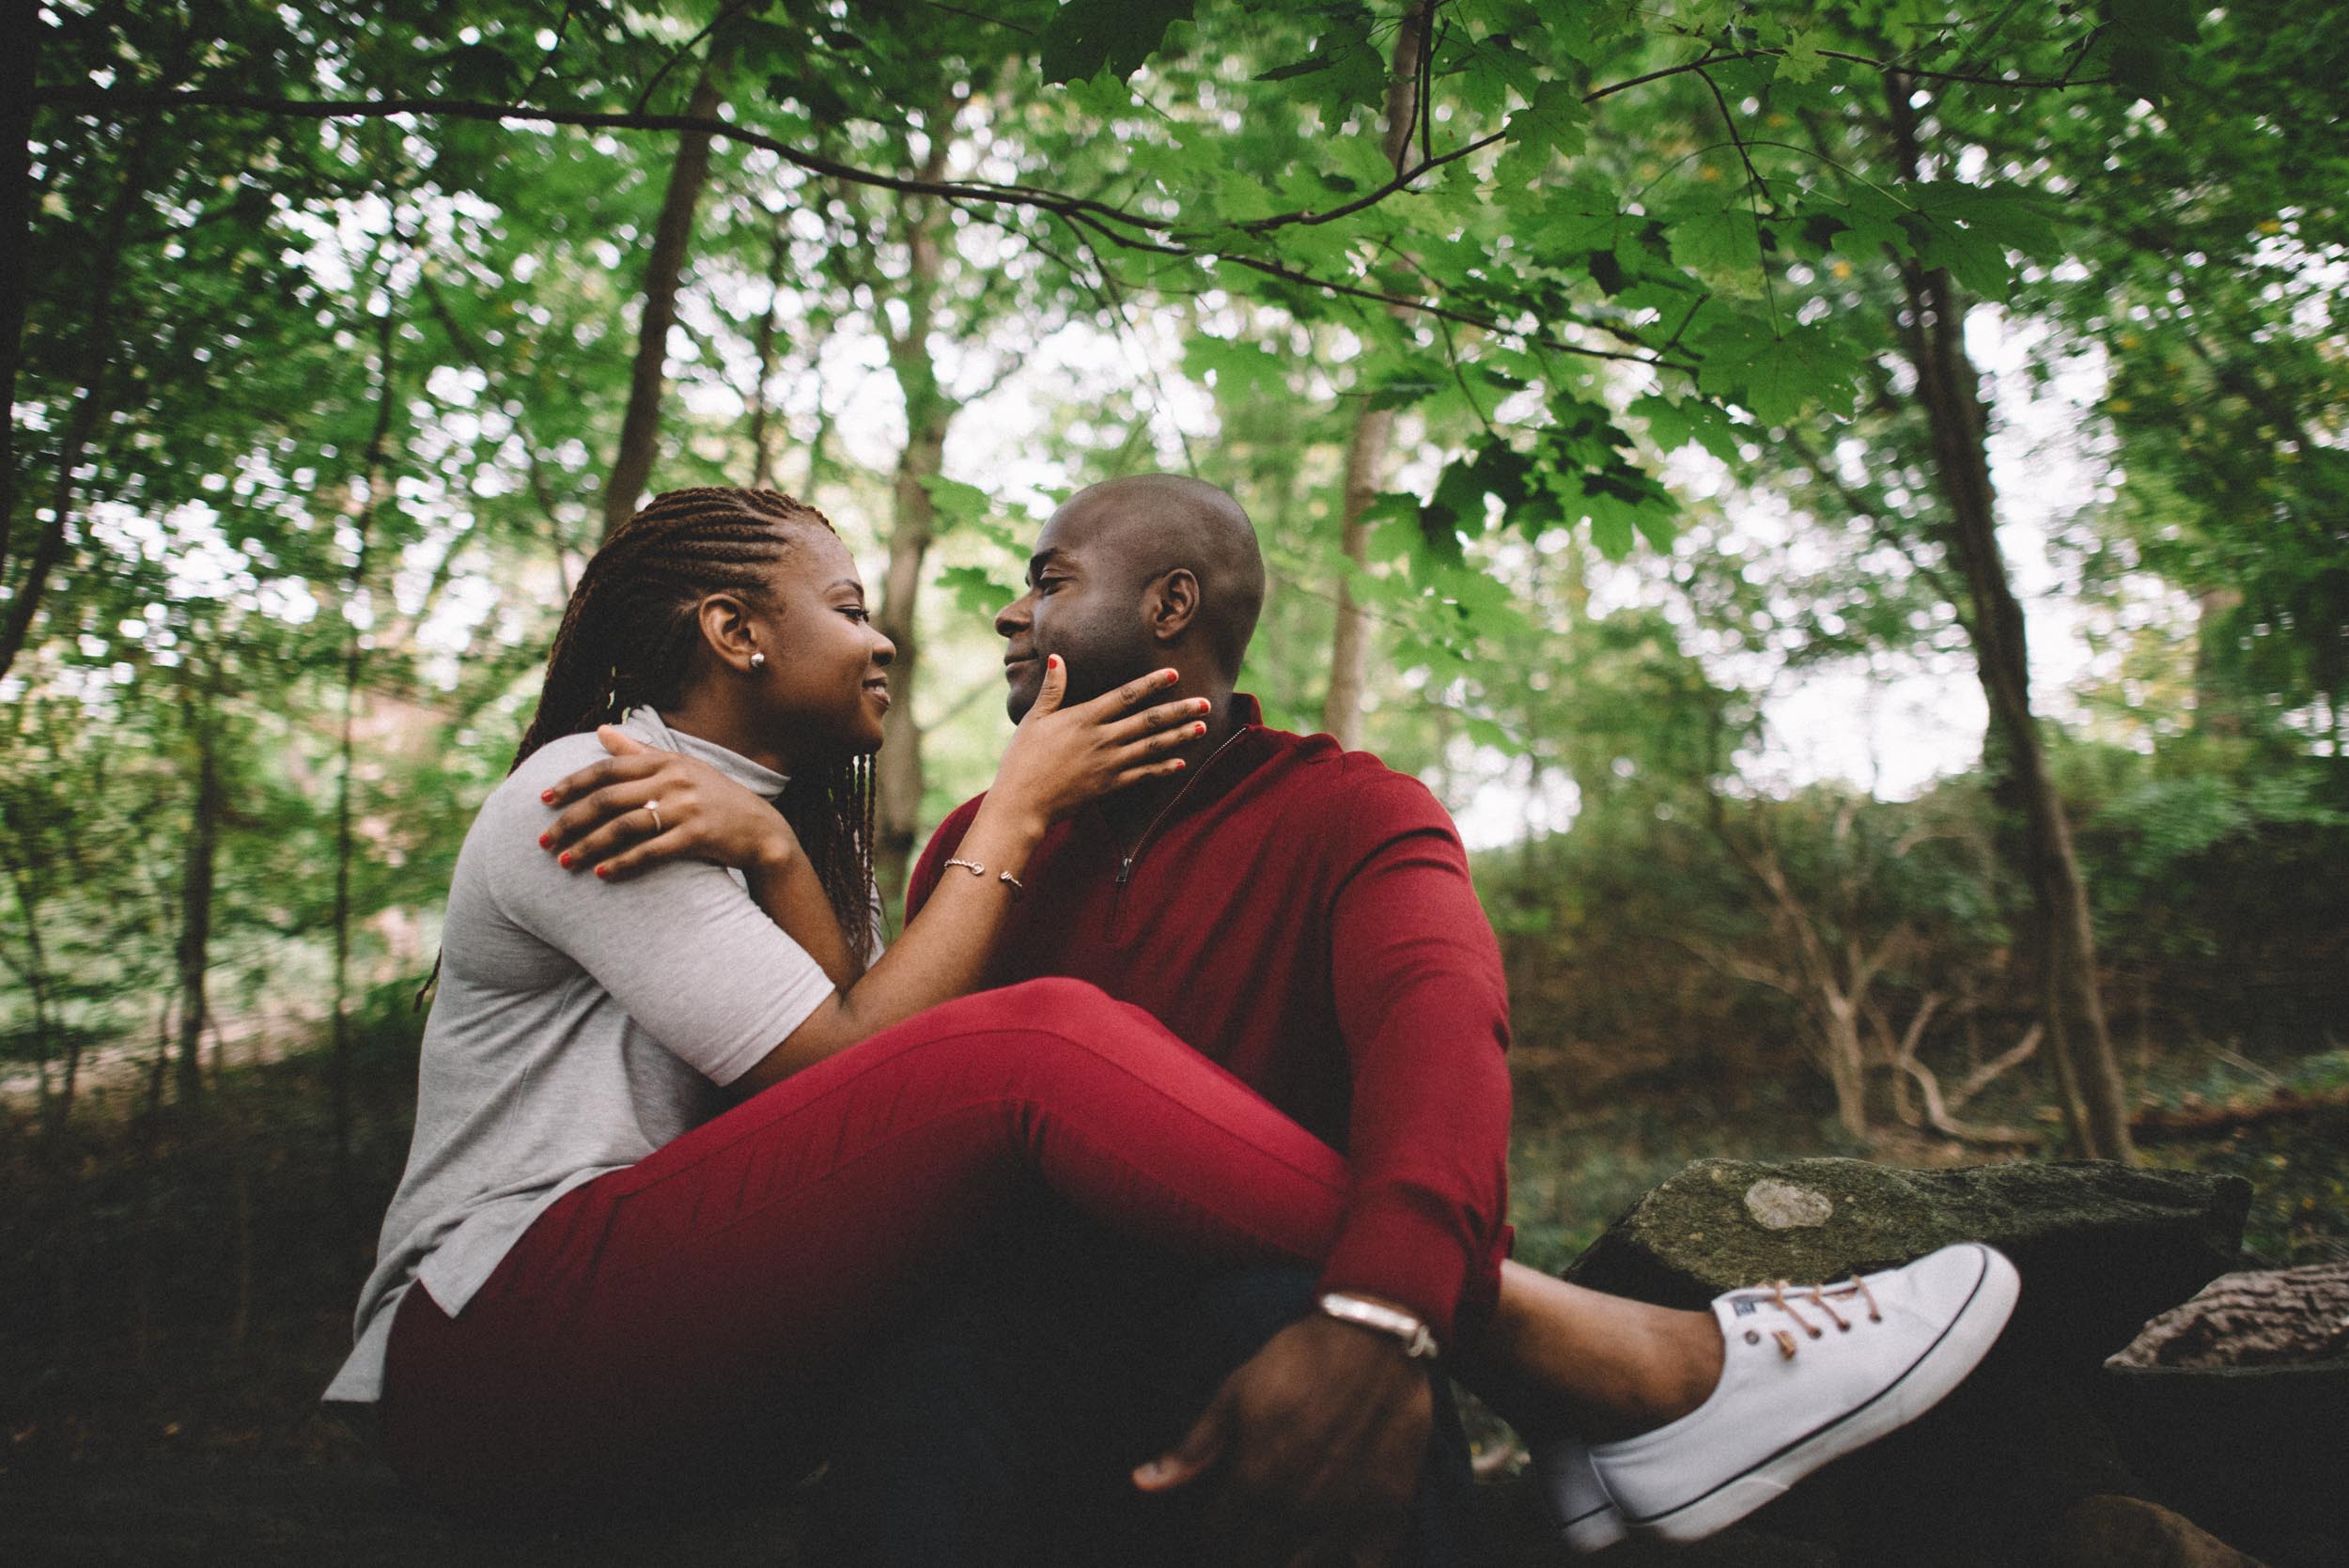 Georgetown Engagement Session